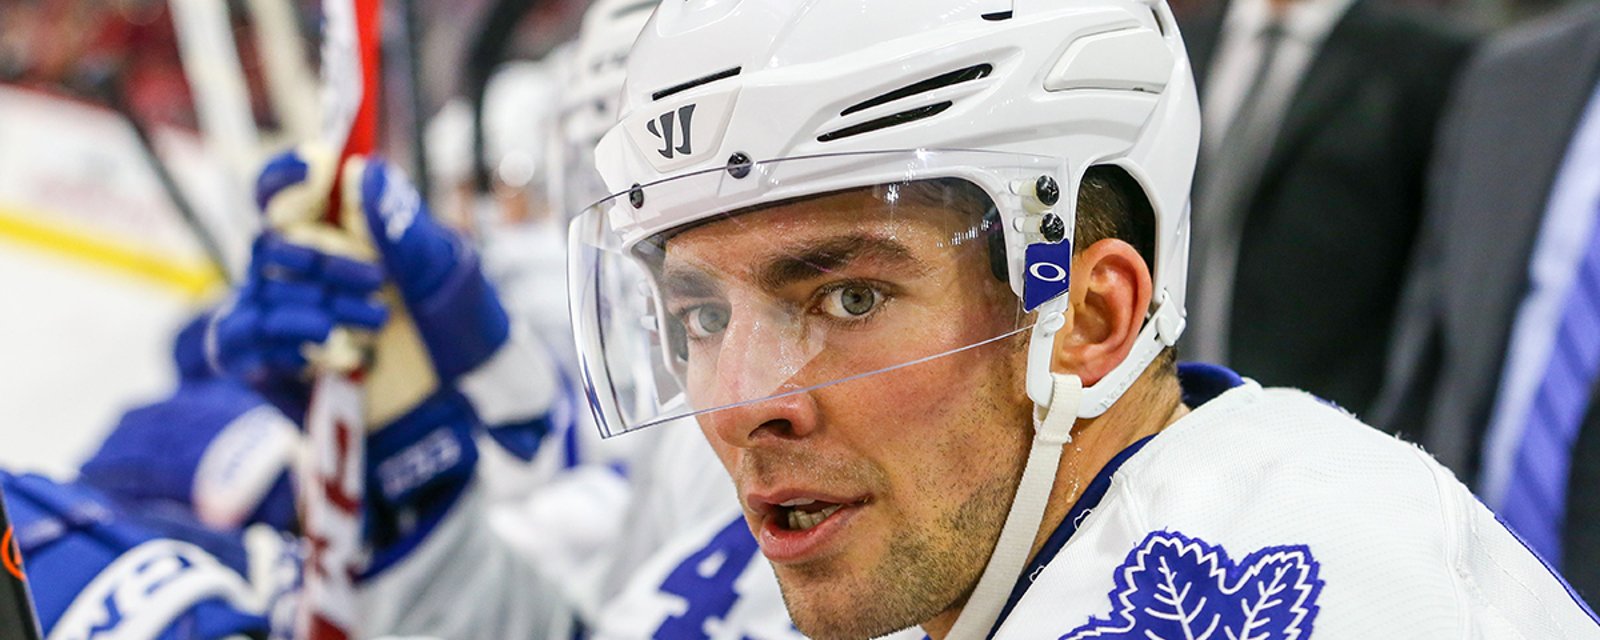 Report: Lupul calls out Leafs, says they “cheat”